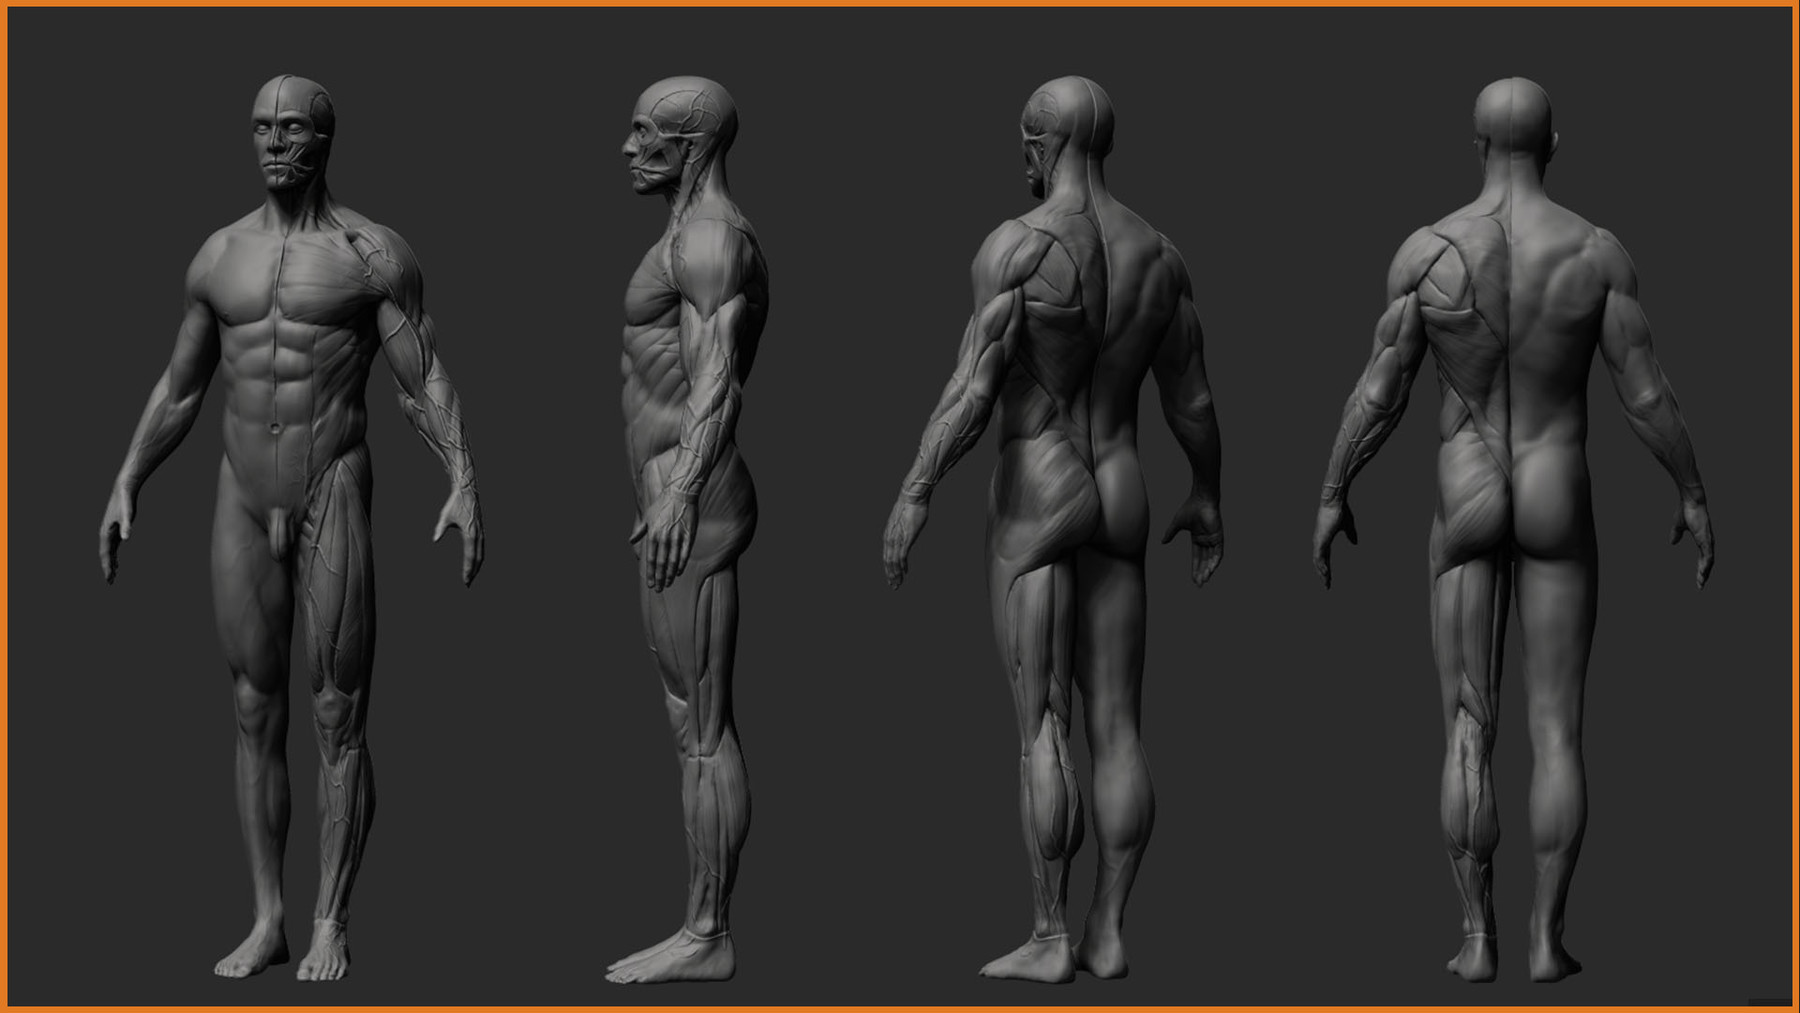 Artstation Anatomy Male Tool Reference For Artists Resources